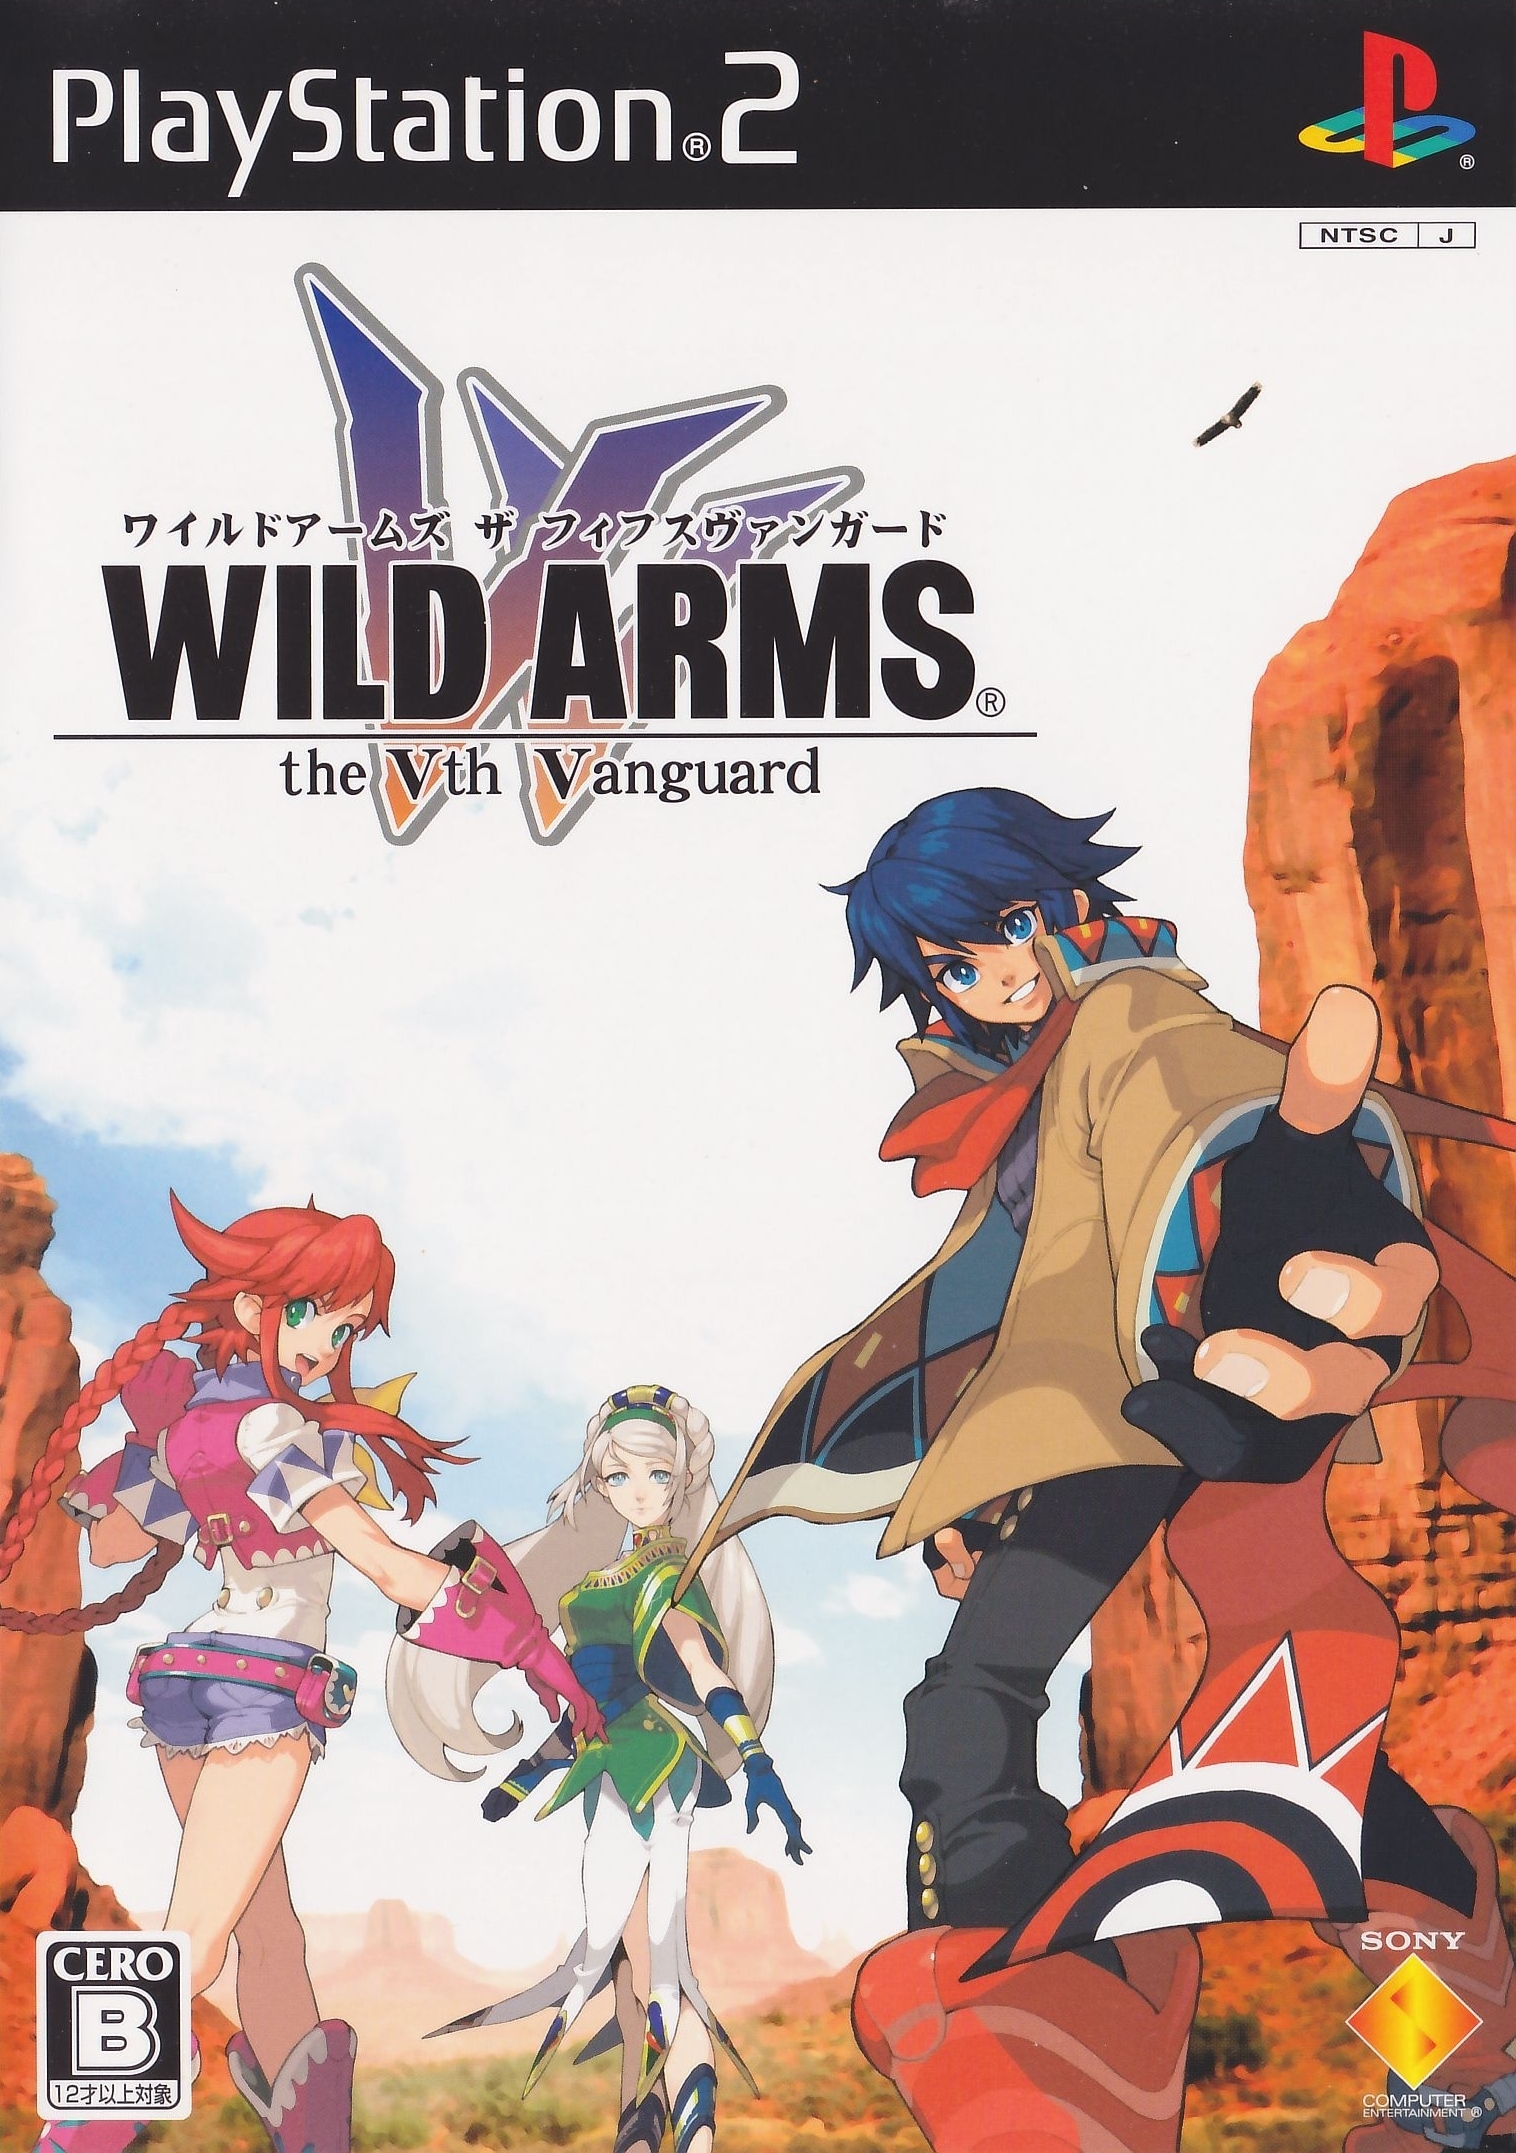 Wild ARMs 5 Box Shot for PlayStation 2 - GameFAQs